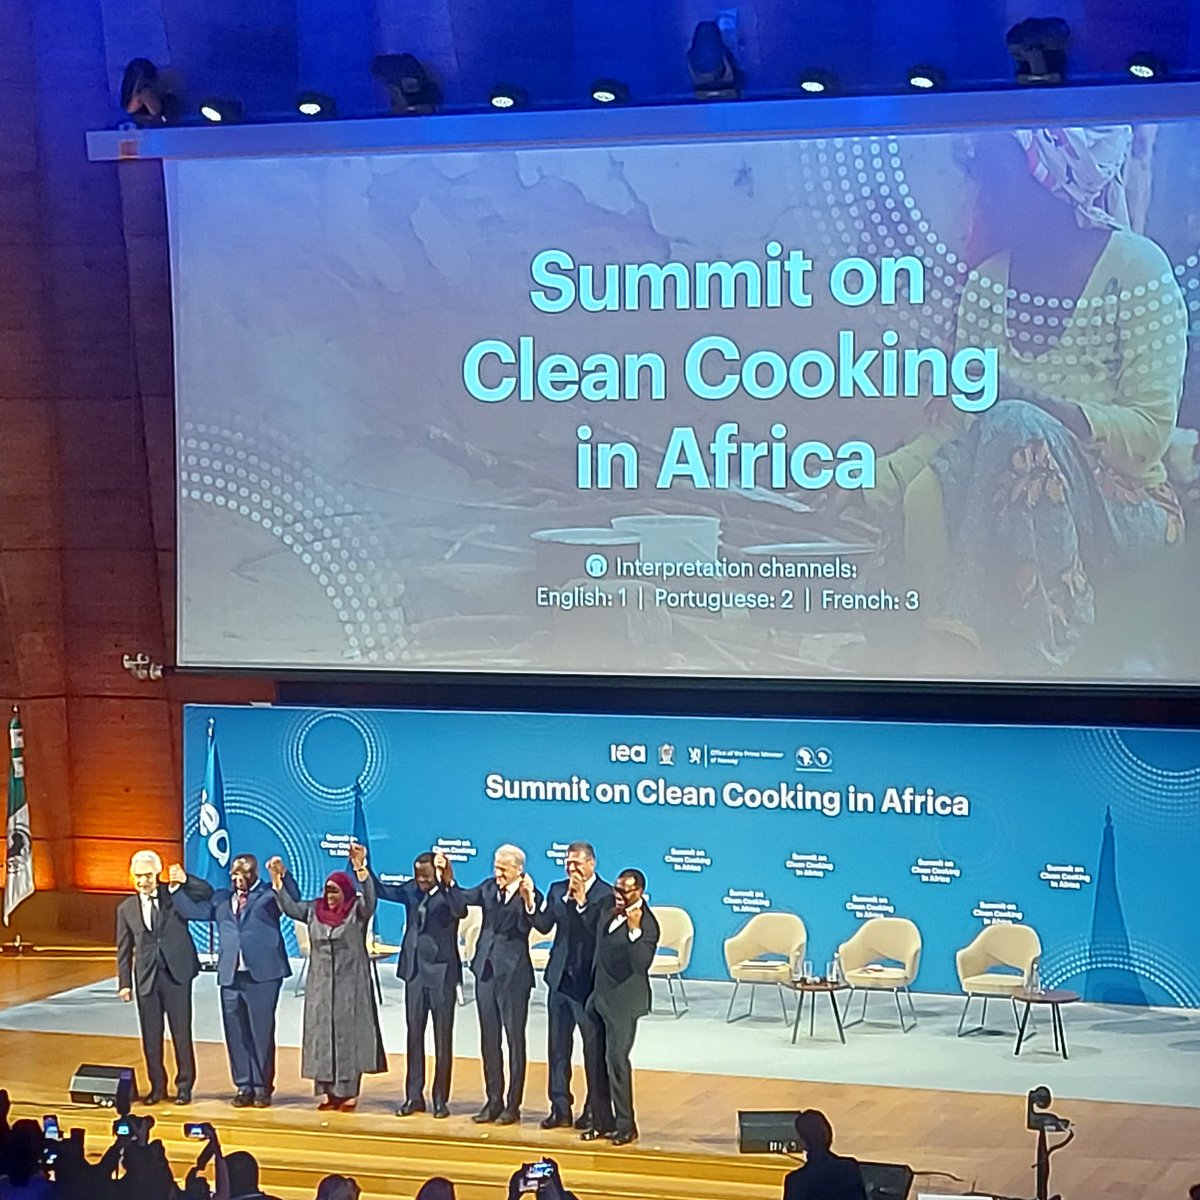 🗞JUST IN | €400M committed by the @EU_Commission in a Team Europe approach, + special initiative in Western Africa for clean cooking at the @IEA Summit on Clean Cooking in Africa.